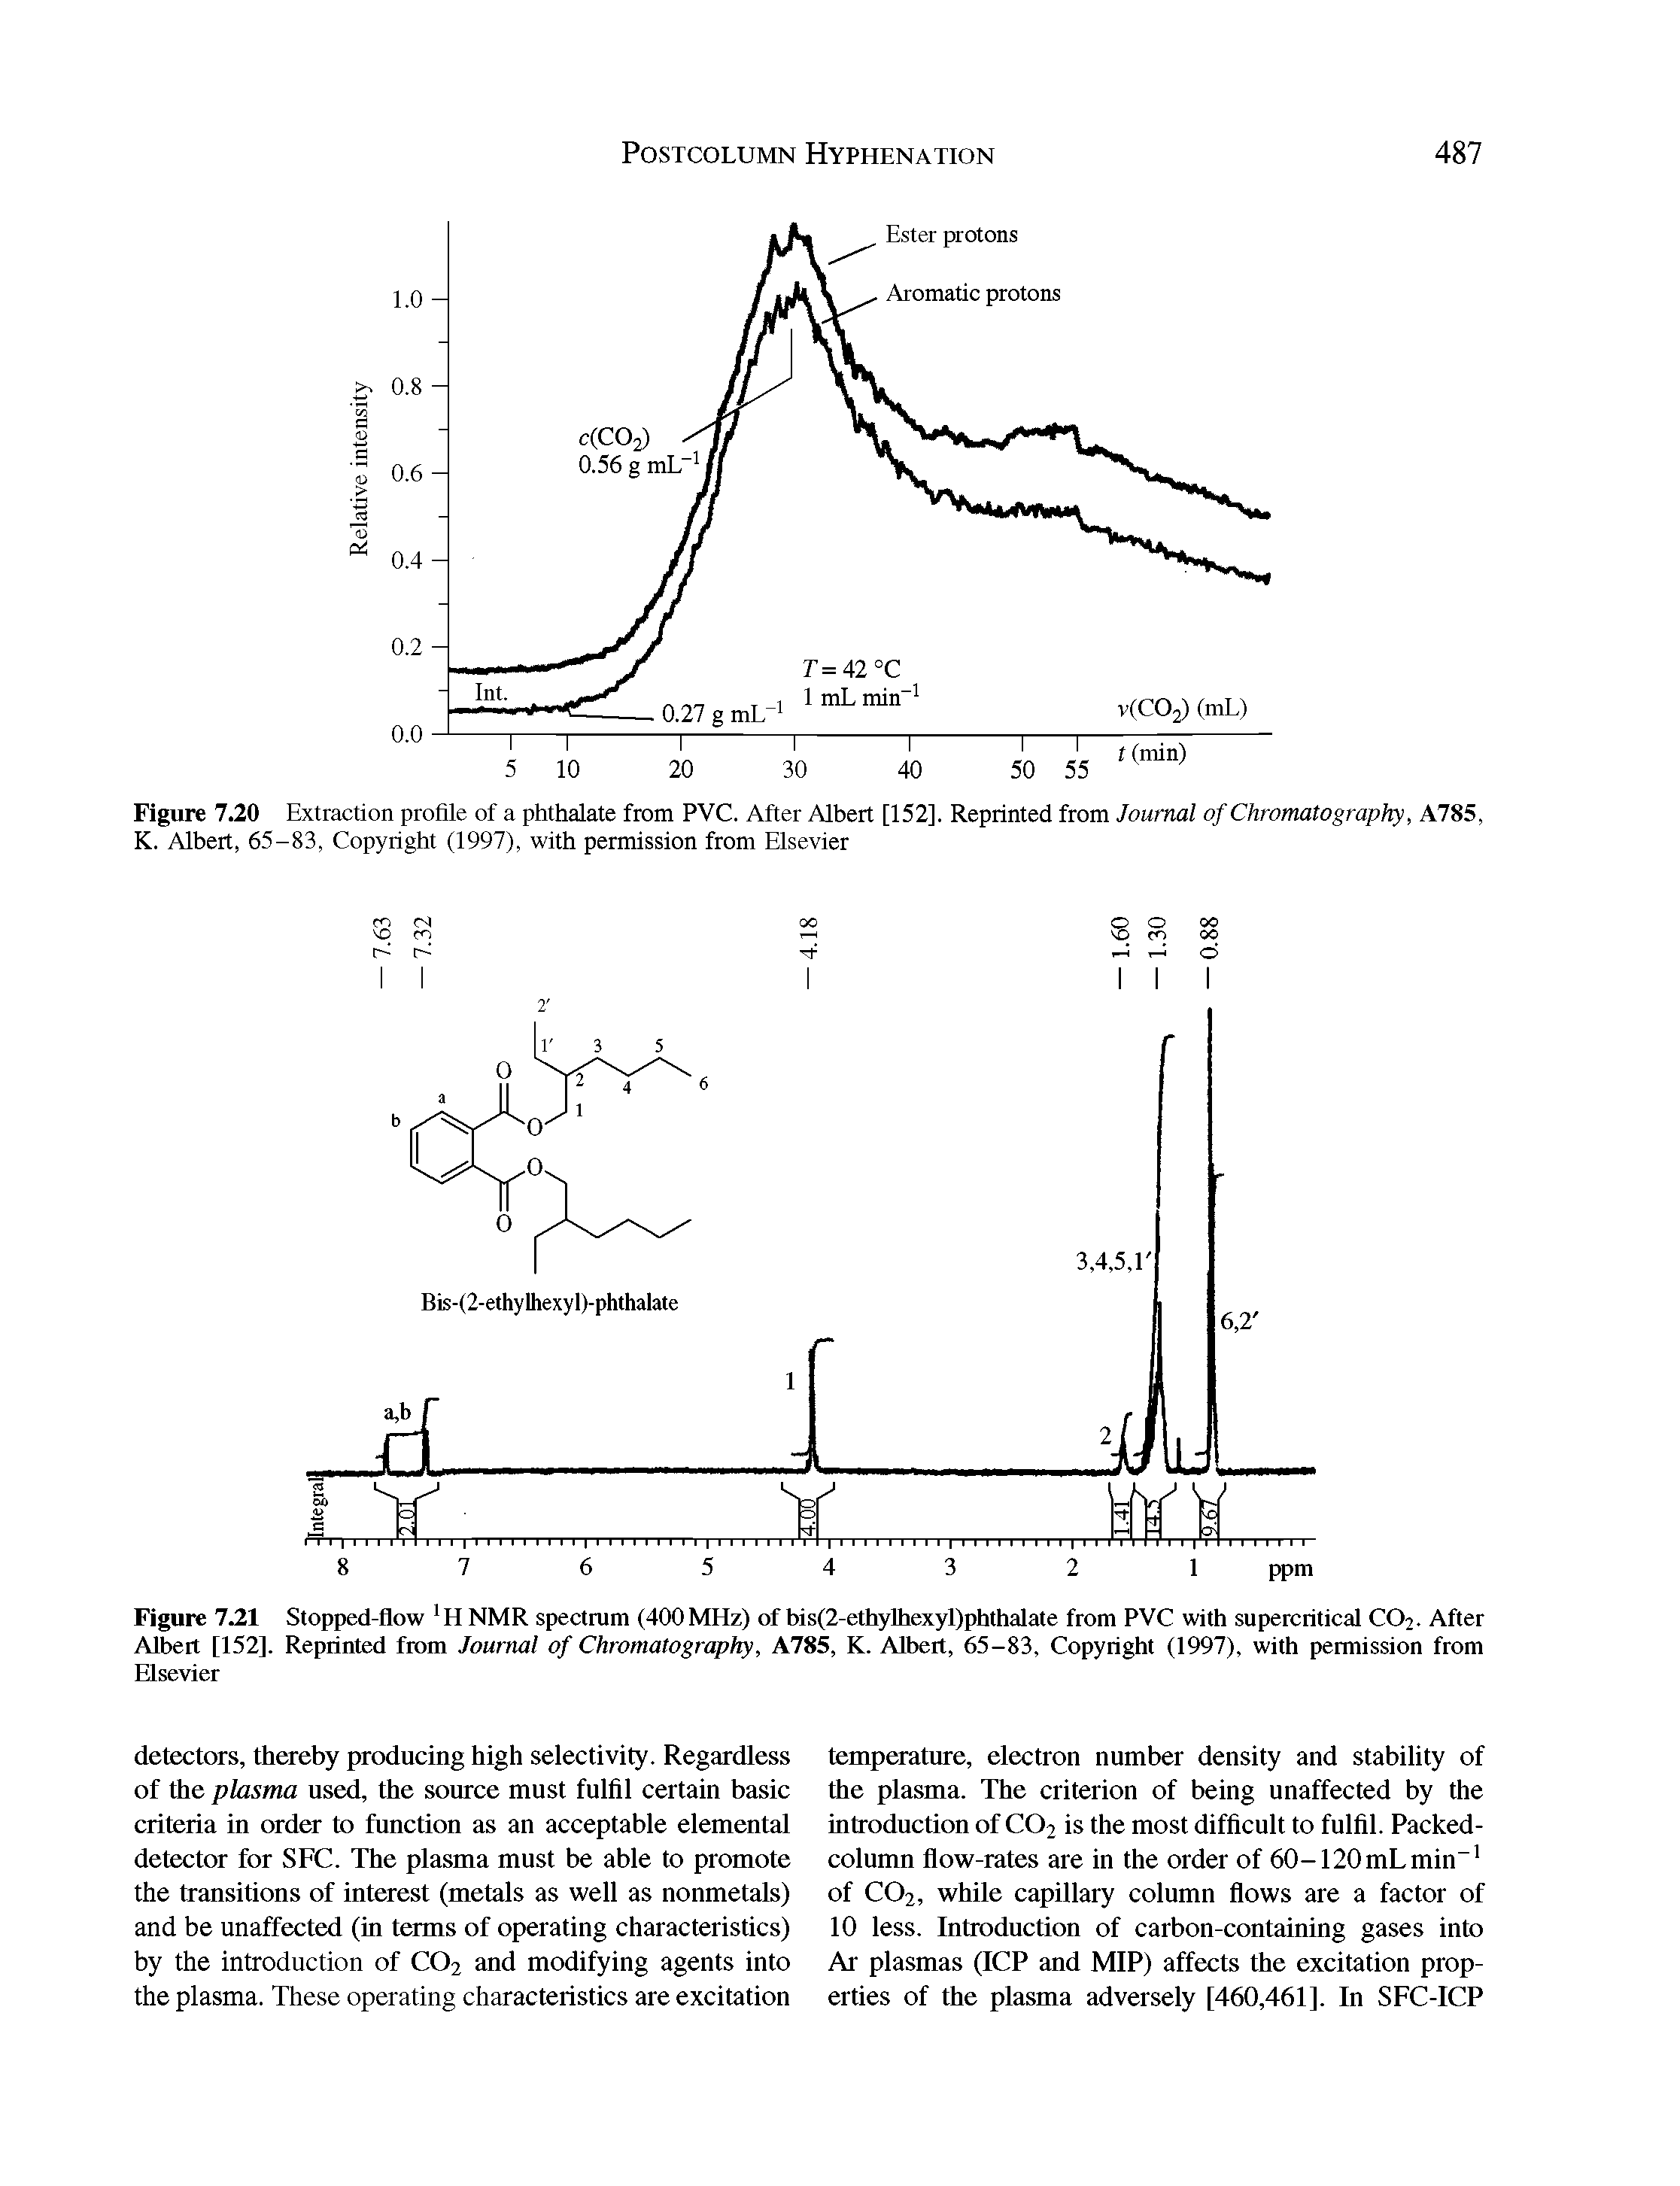 Figure 7.20 Extraction profile of a phthalate from PVC. After Albert [152], Reprinted from Journal of Chromatography, A785, K. Albert, 65-83, Copyright (1997), with permission from Elsevier...